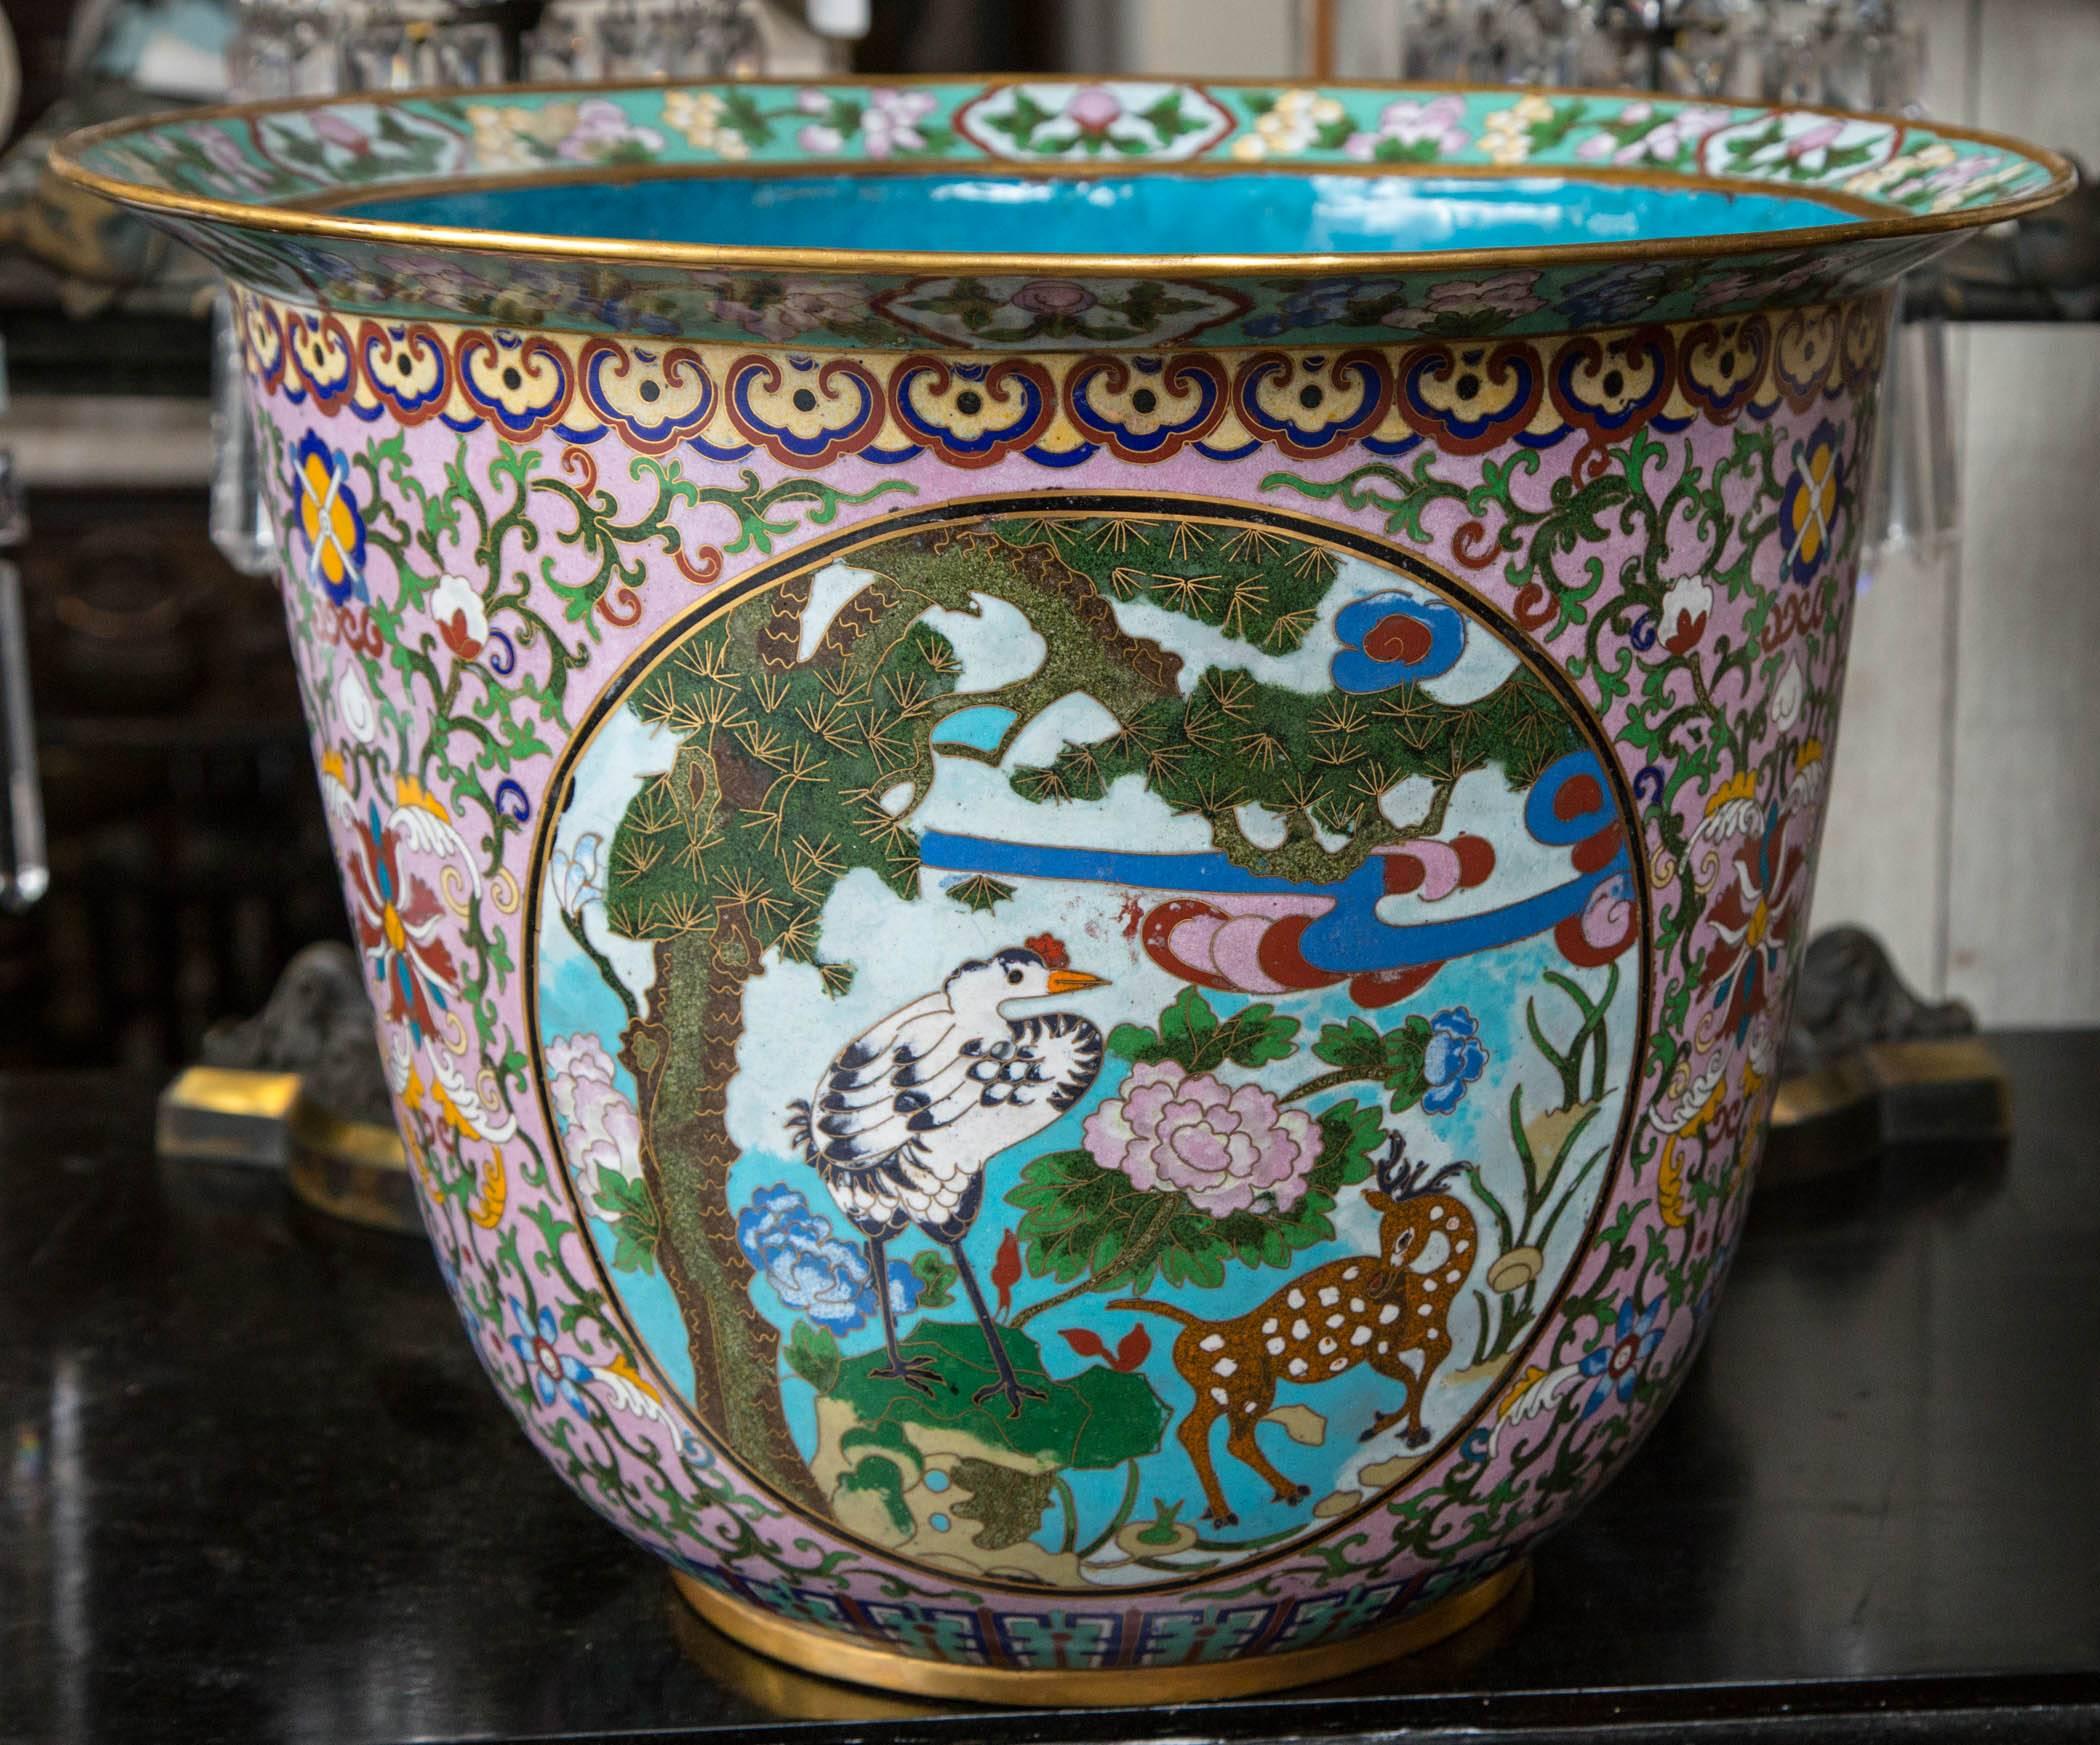 This multi colored pair of cloisonné planters are each decorated with three round scenes of a crane and a fawn in a forest setting. The interior is solid sky blue with a band of flowers. Chinese symbols decorate the bodies apart from the forest